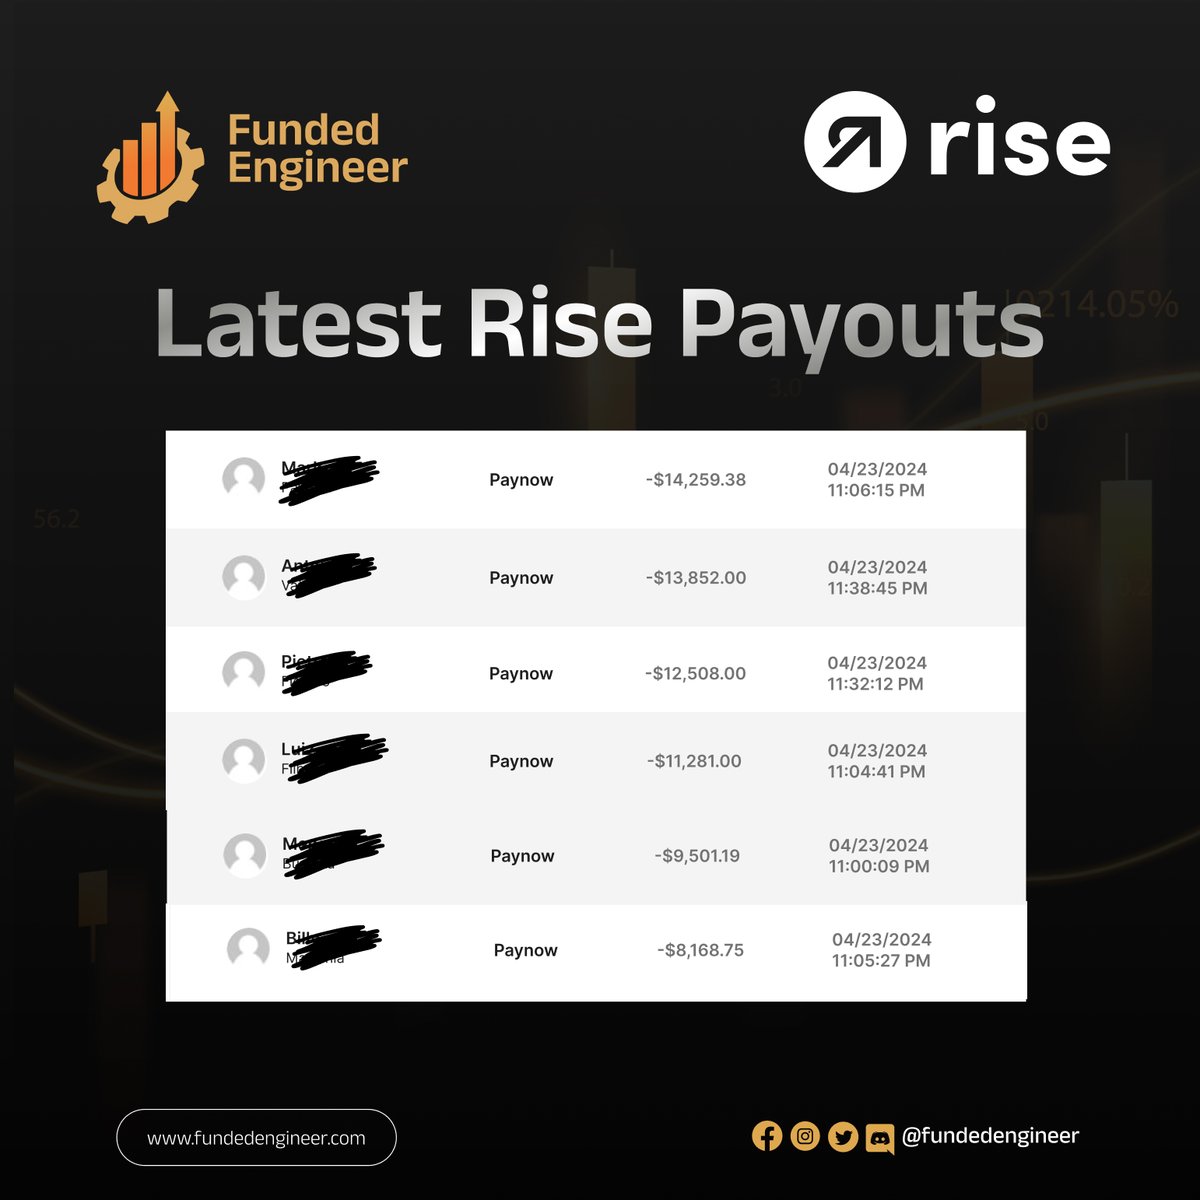 Some of the most recent Rise payouts! 👀 #FundedEngineer